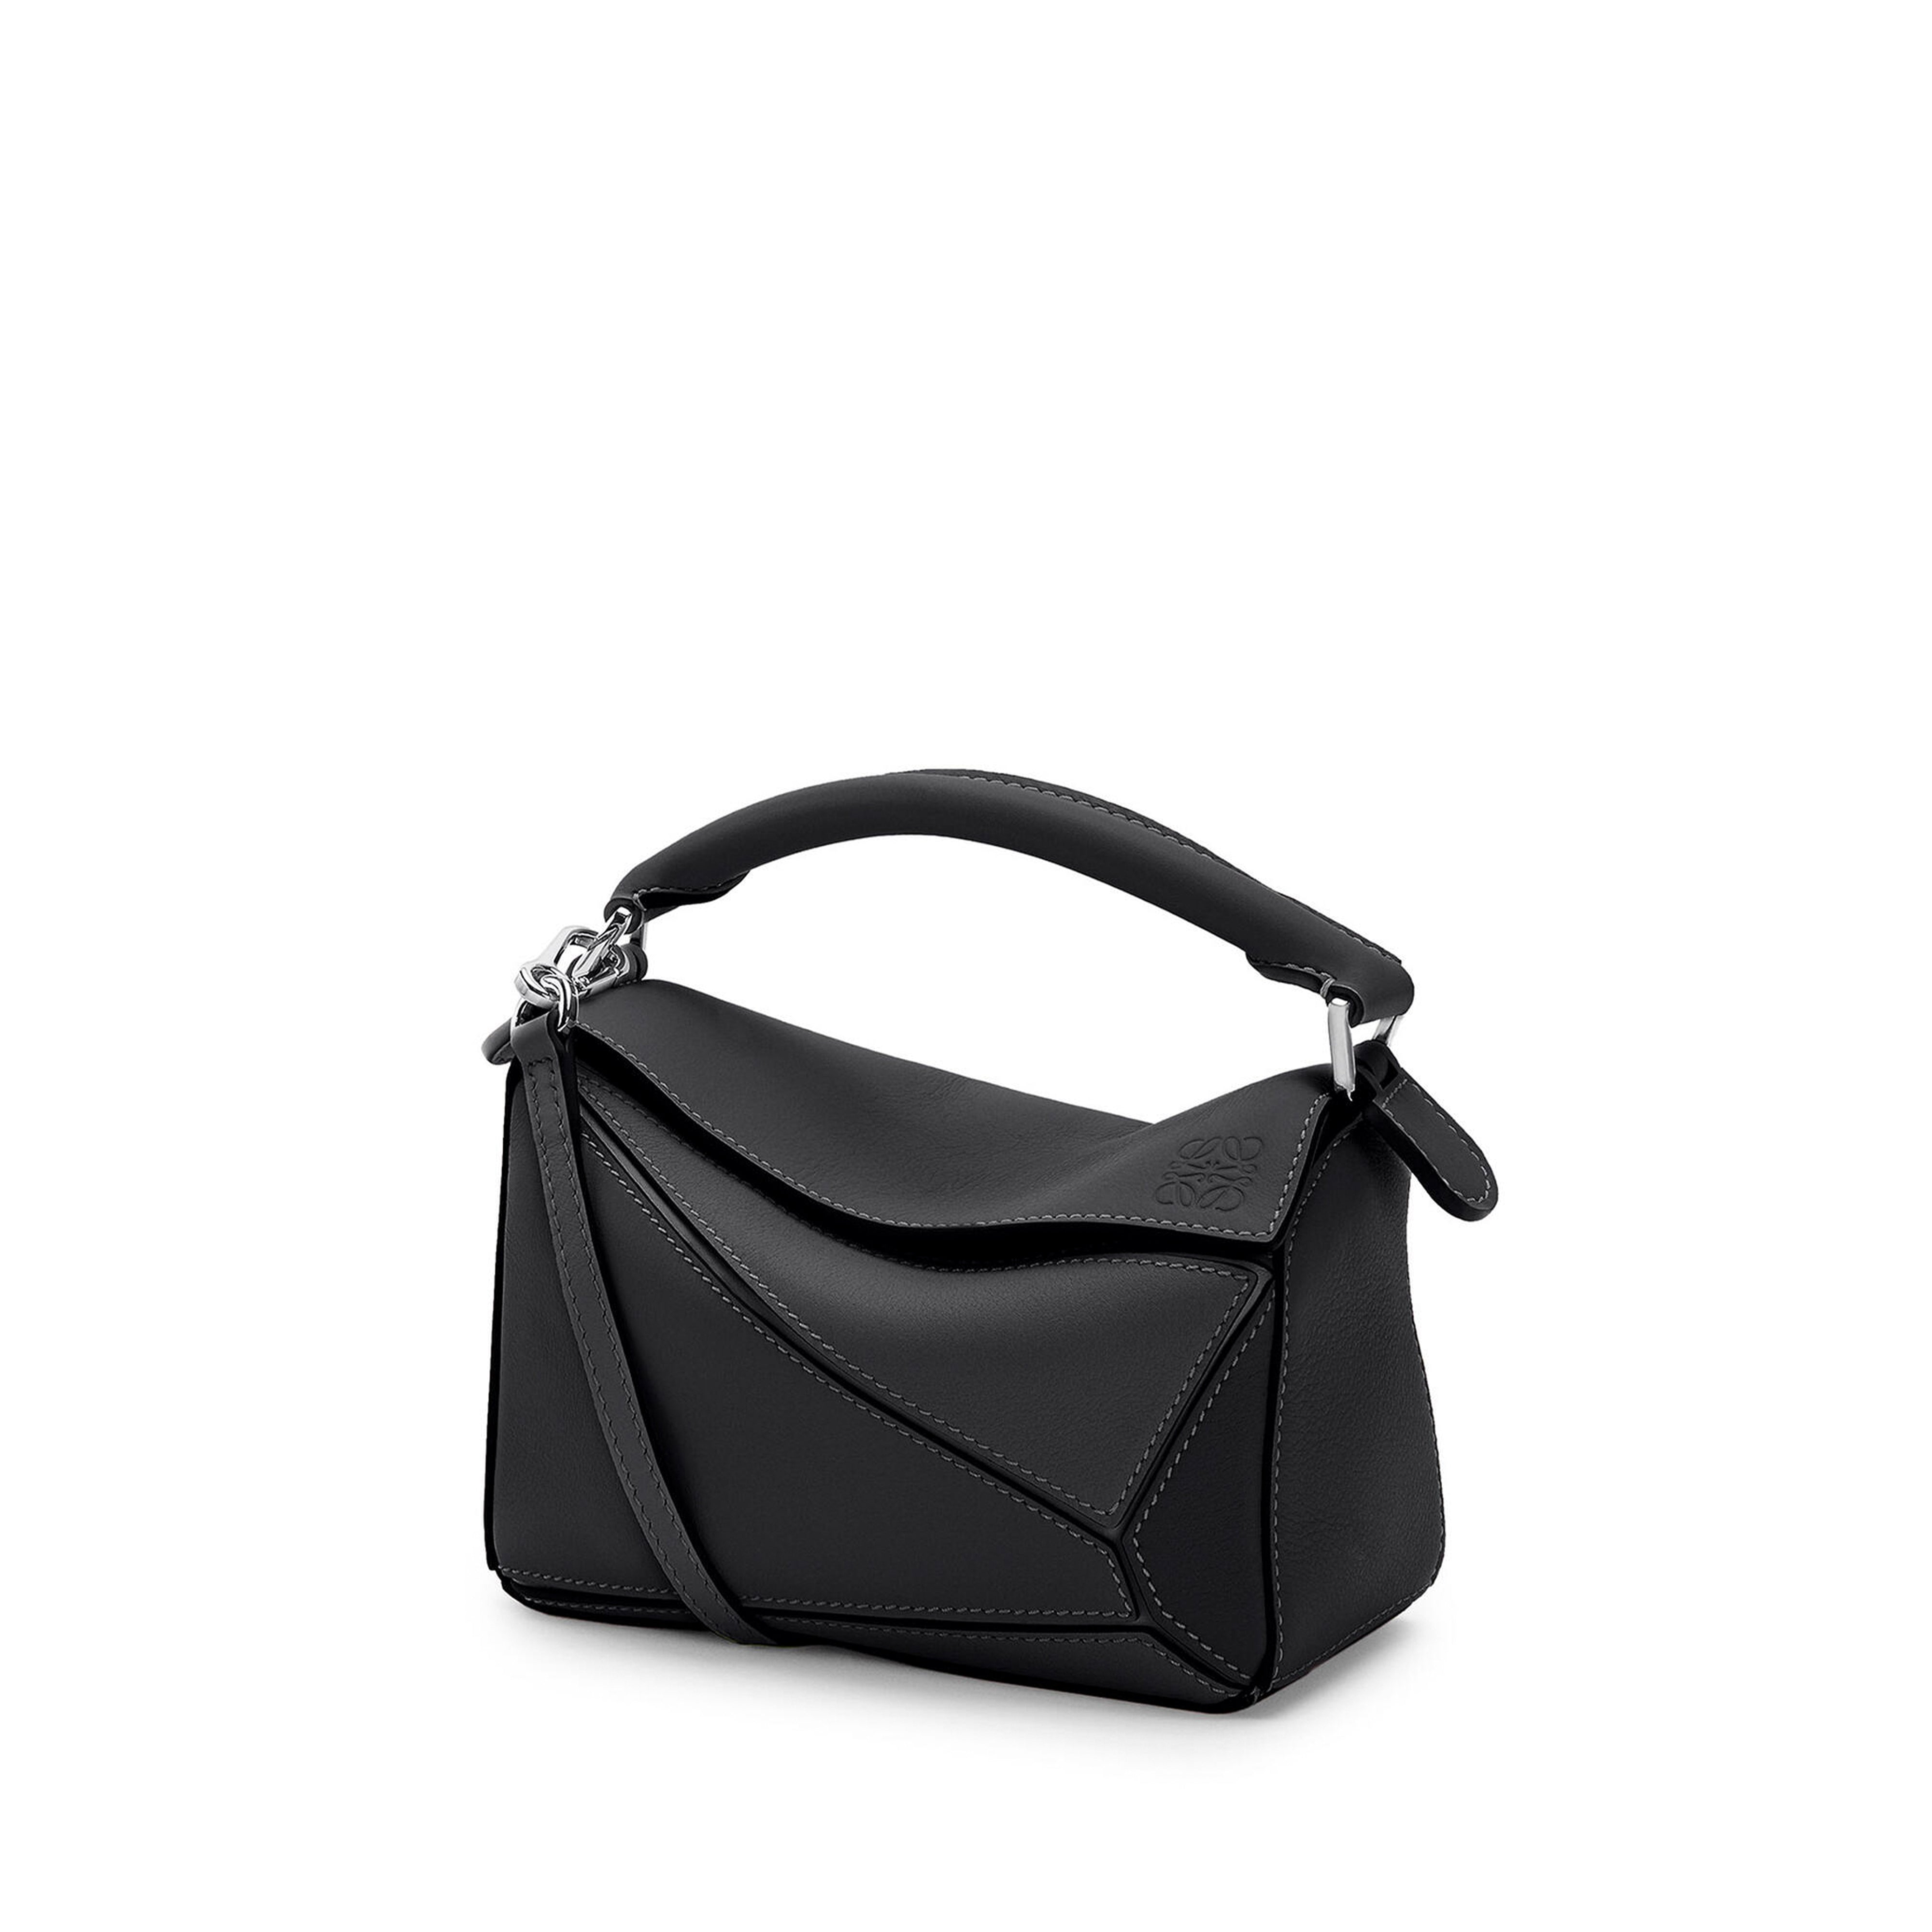 Dadou~Chic: Loewe puzzle bag small - Discount Code